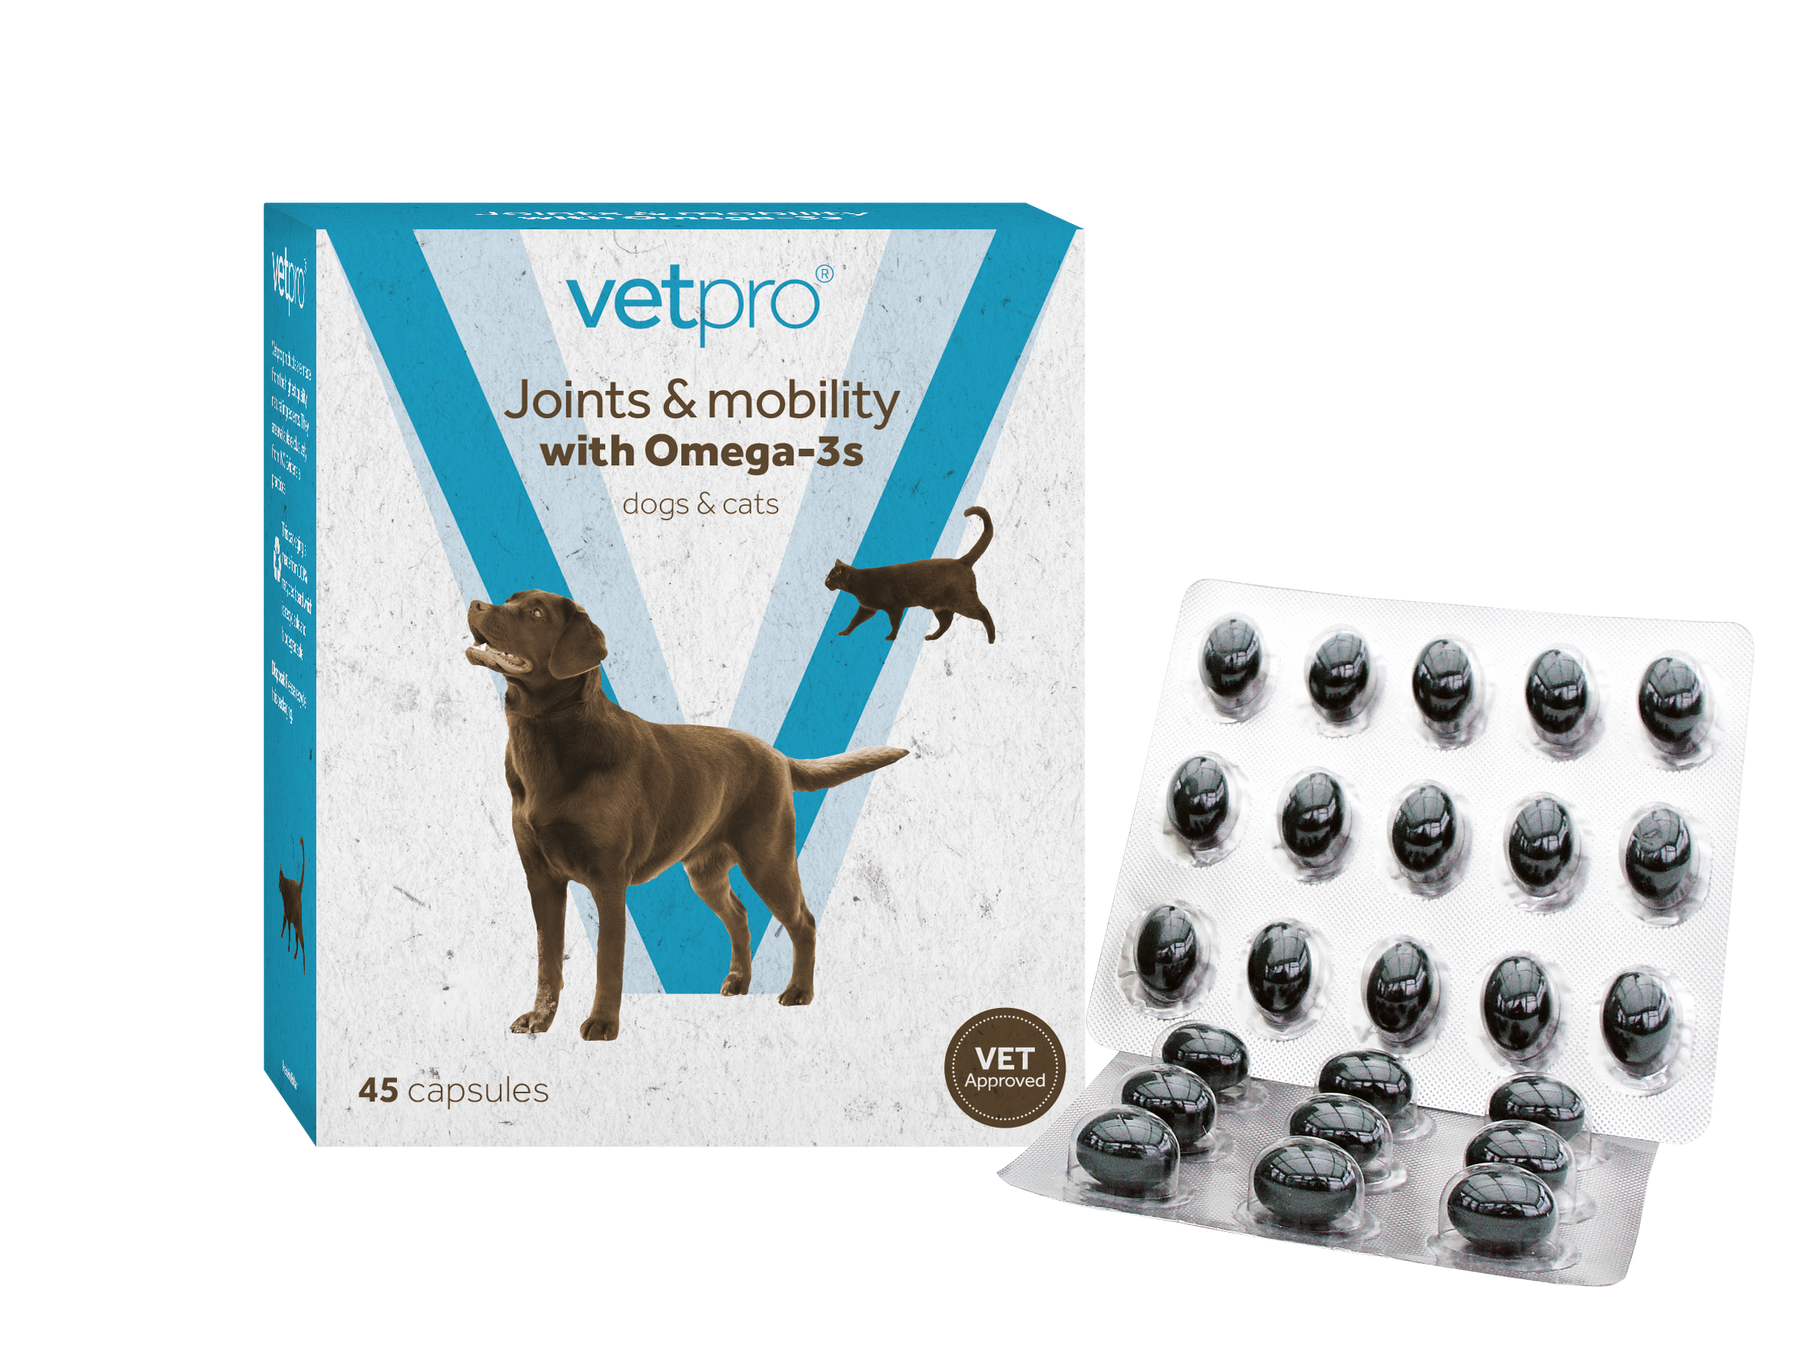 Vetpro Joints & Mobility with Omega-3s - 45 capsules